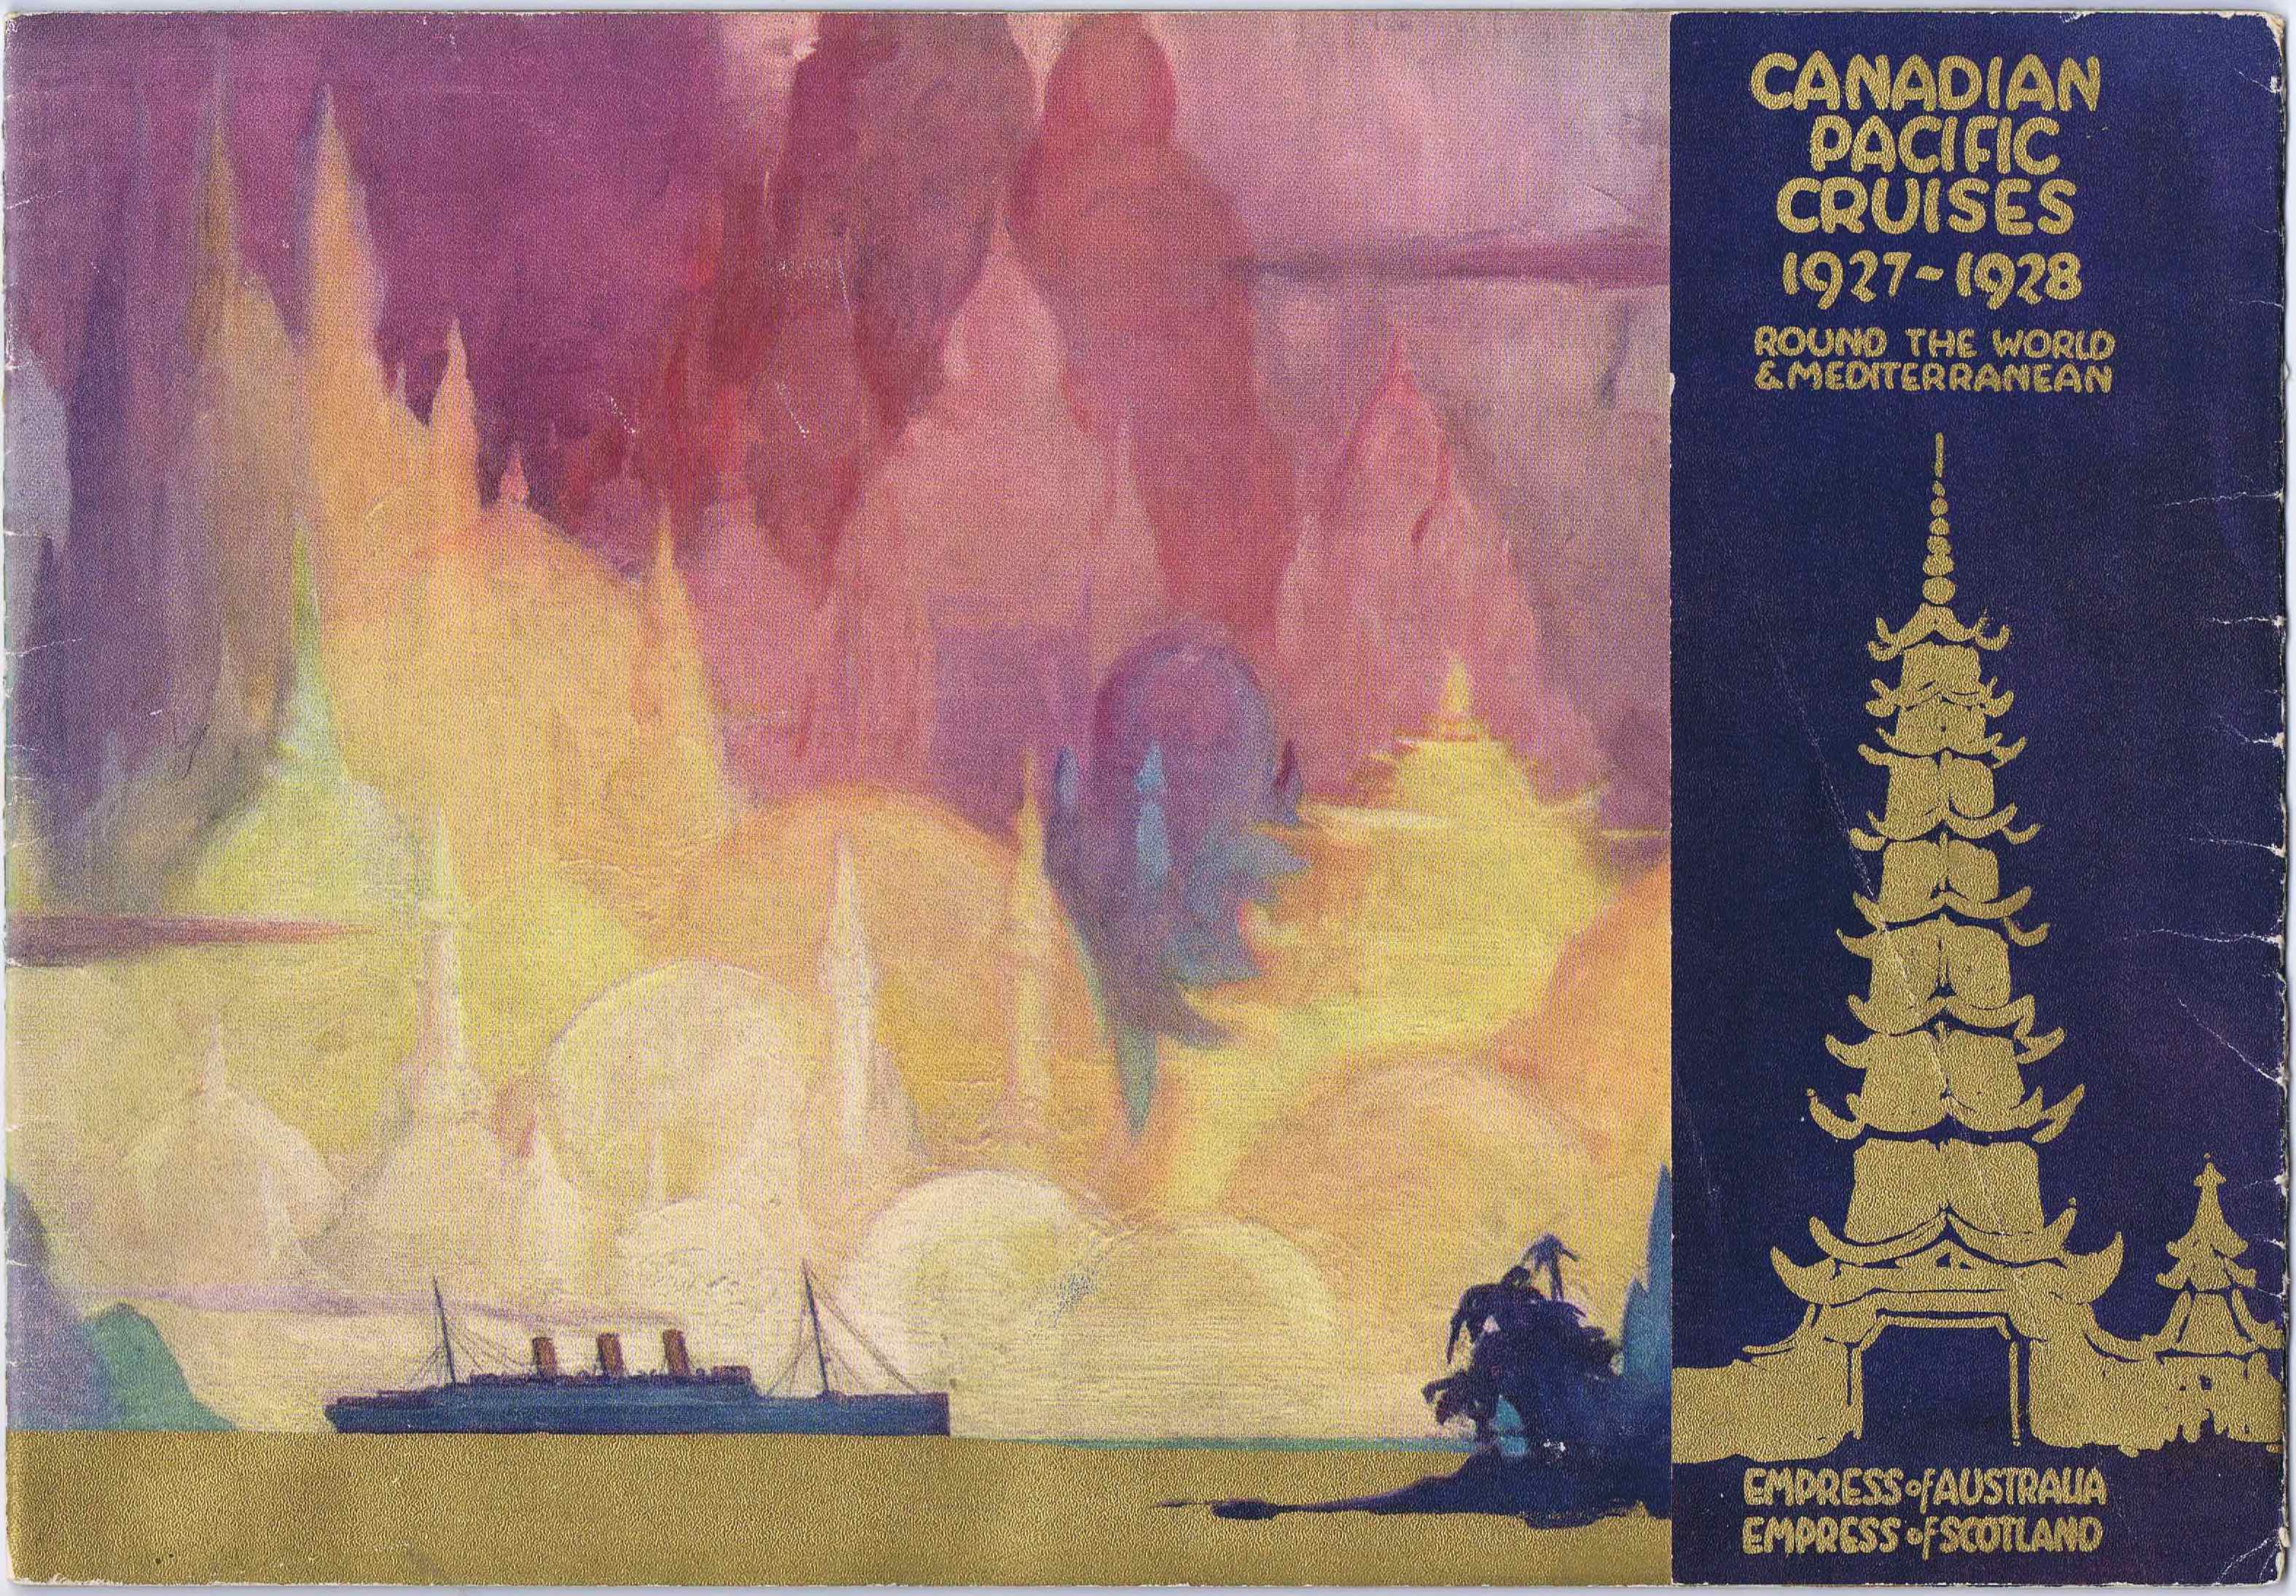 J336	CANADIAN PACIFIC CRUISES 1927-1928 ROUND THE WORLD & MEDITERRANEAN